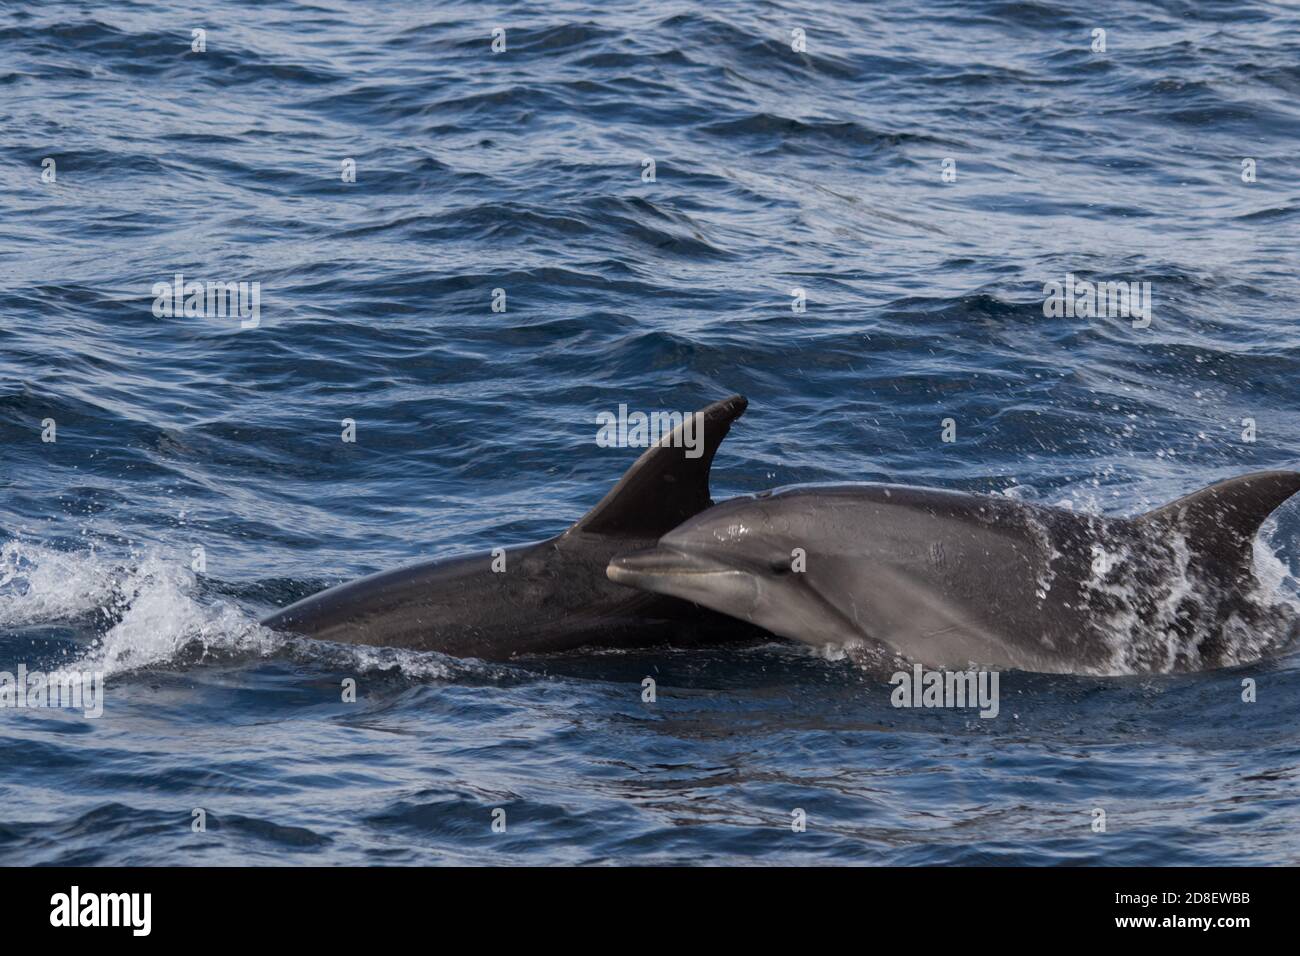 Two Bottlenose Dolphins (Tursiops truncatus) seen off the coast of New Zealand. Stock Photo